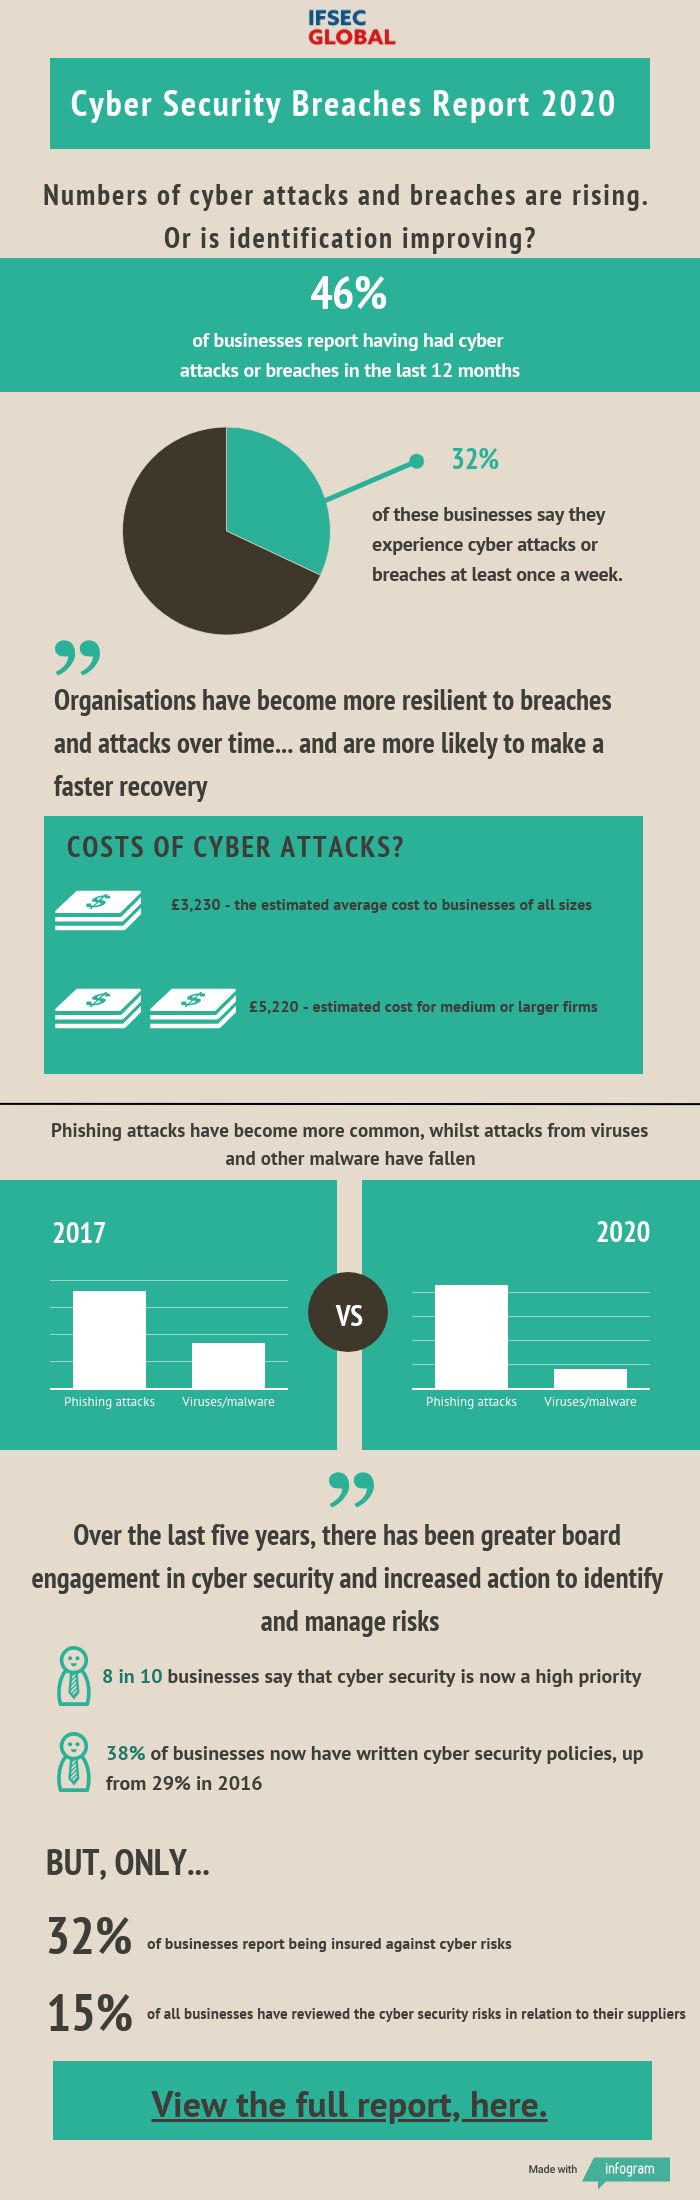 cyber-security-breaches-report-2020-Infographic